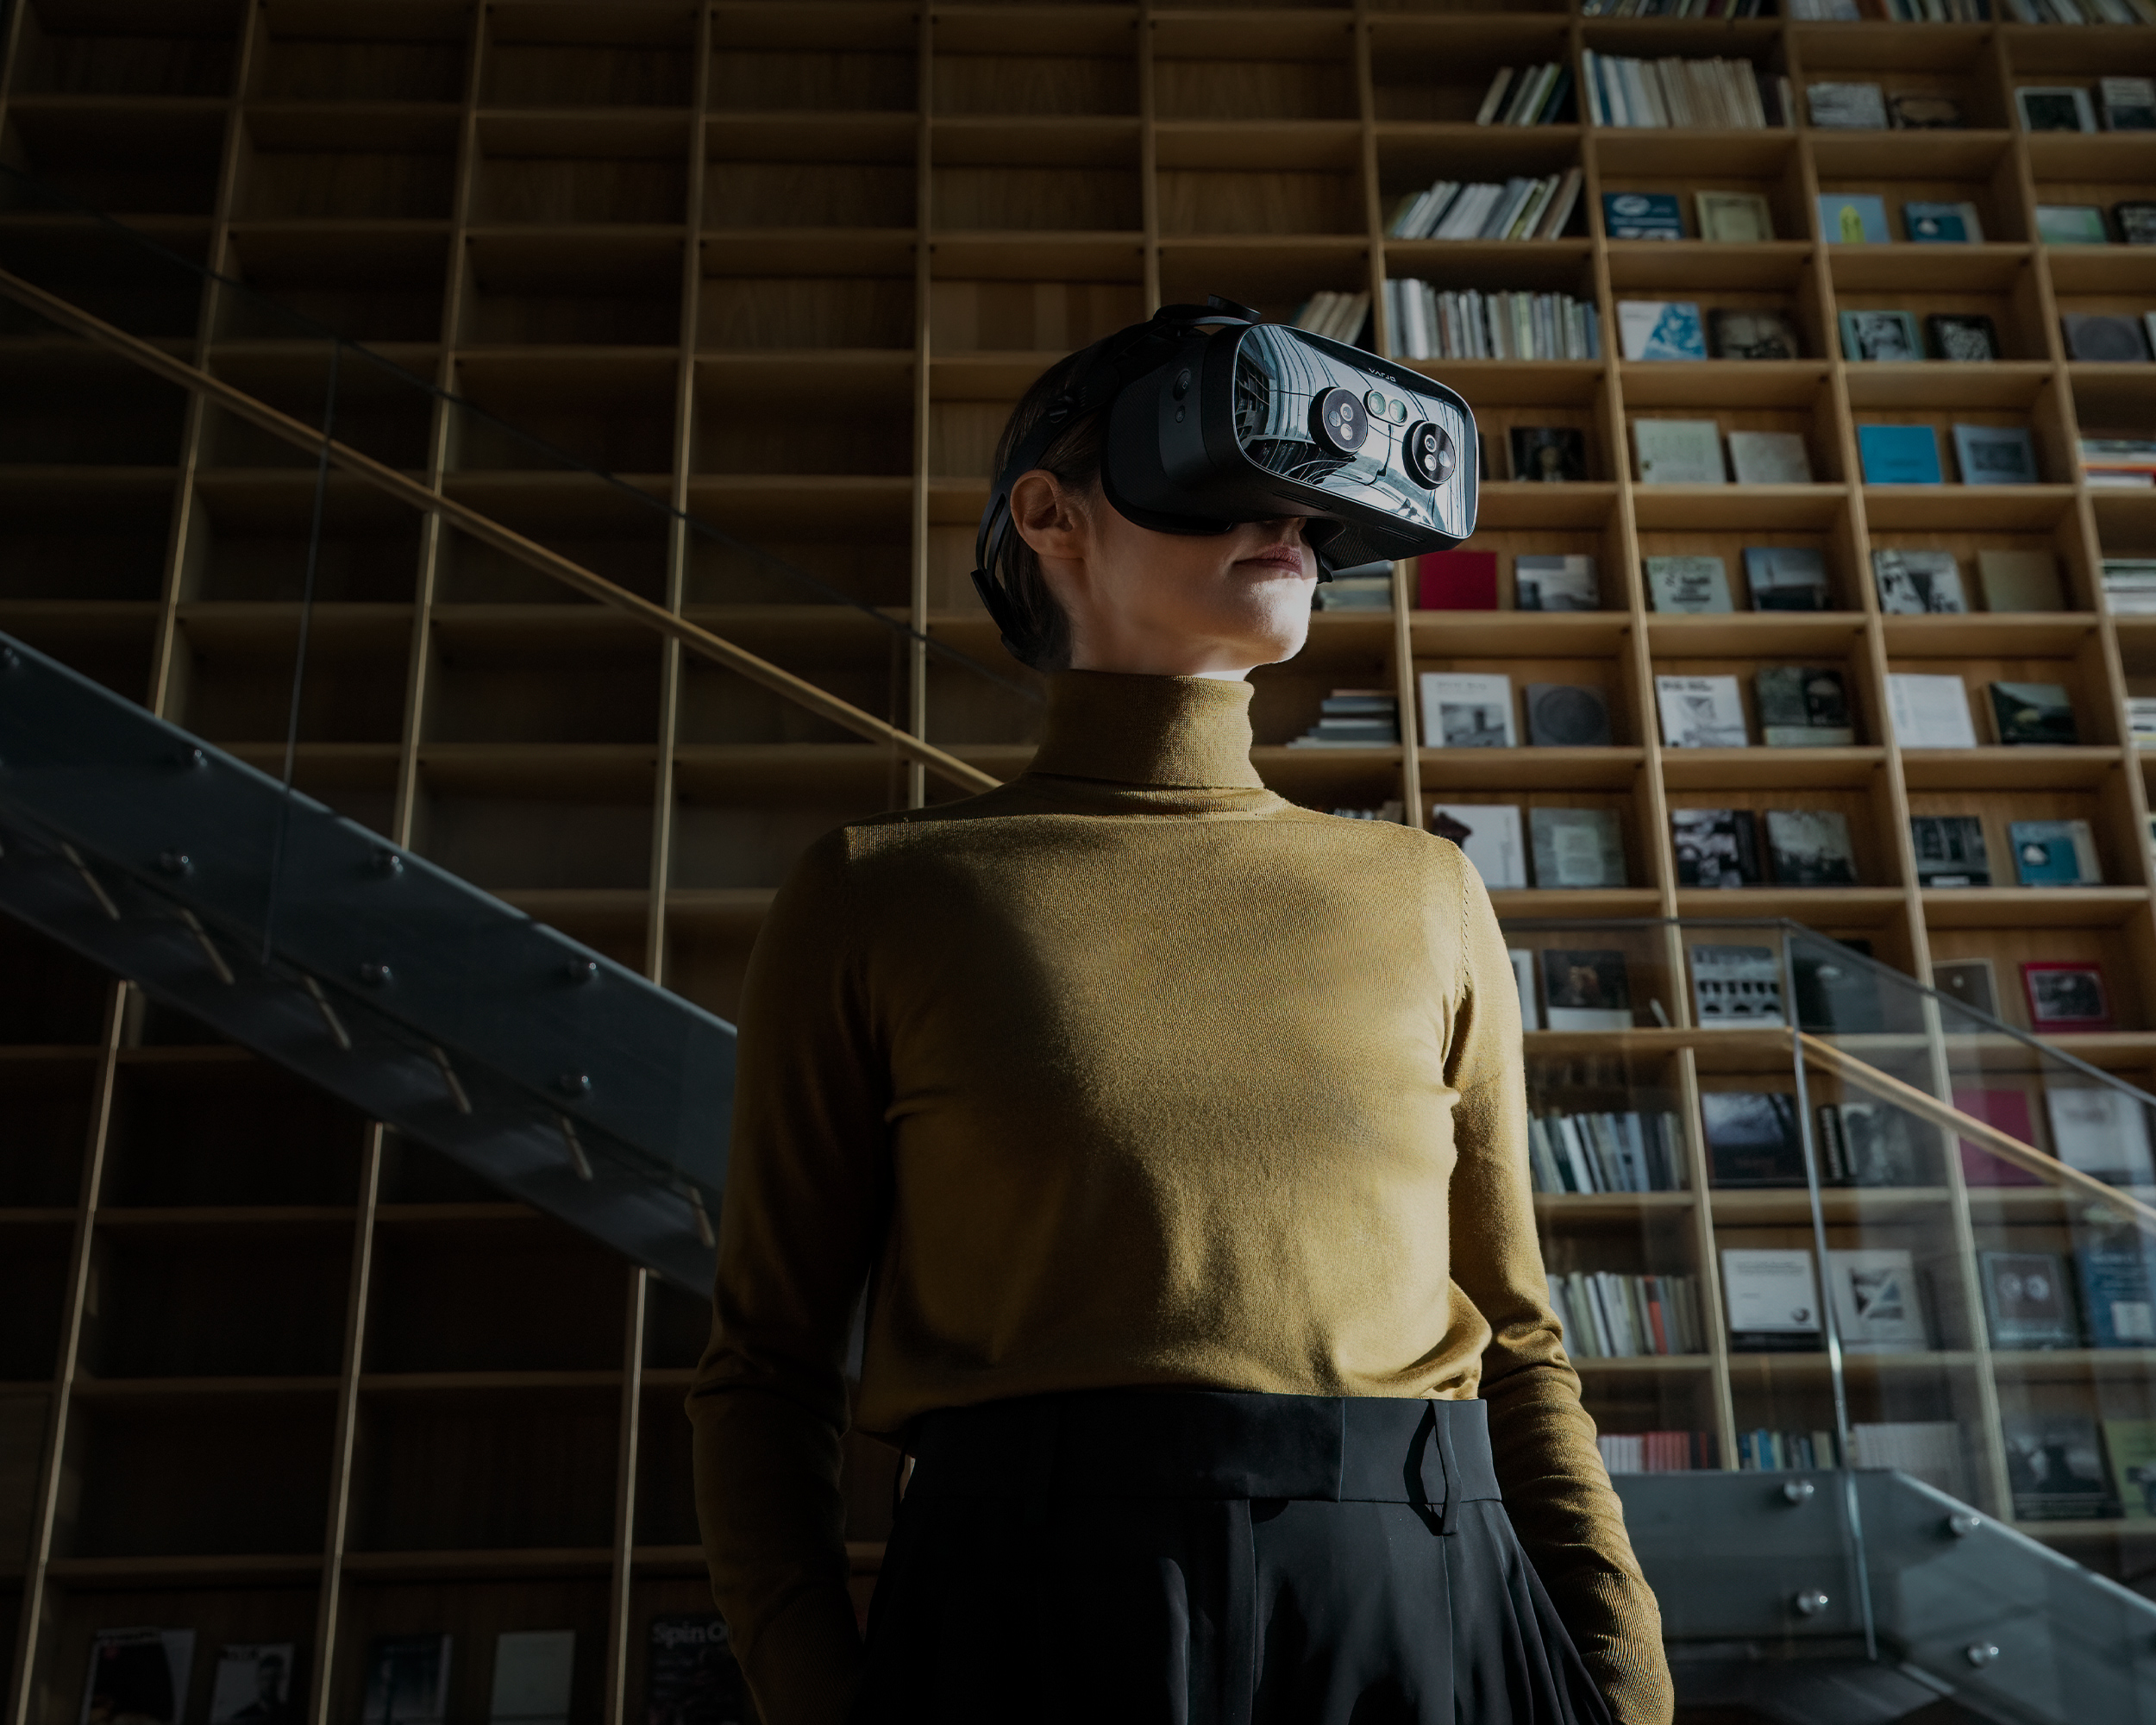 VR for research – Find out how Varjo headsets allow you to conduct high-level academic, clinical and commercial studies in the most immersive XR/AR/VR environments.